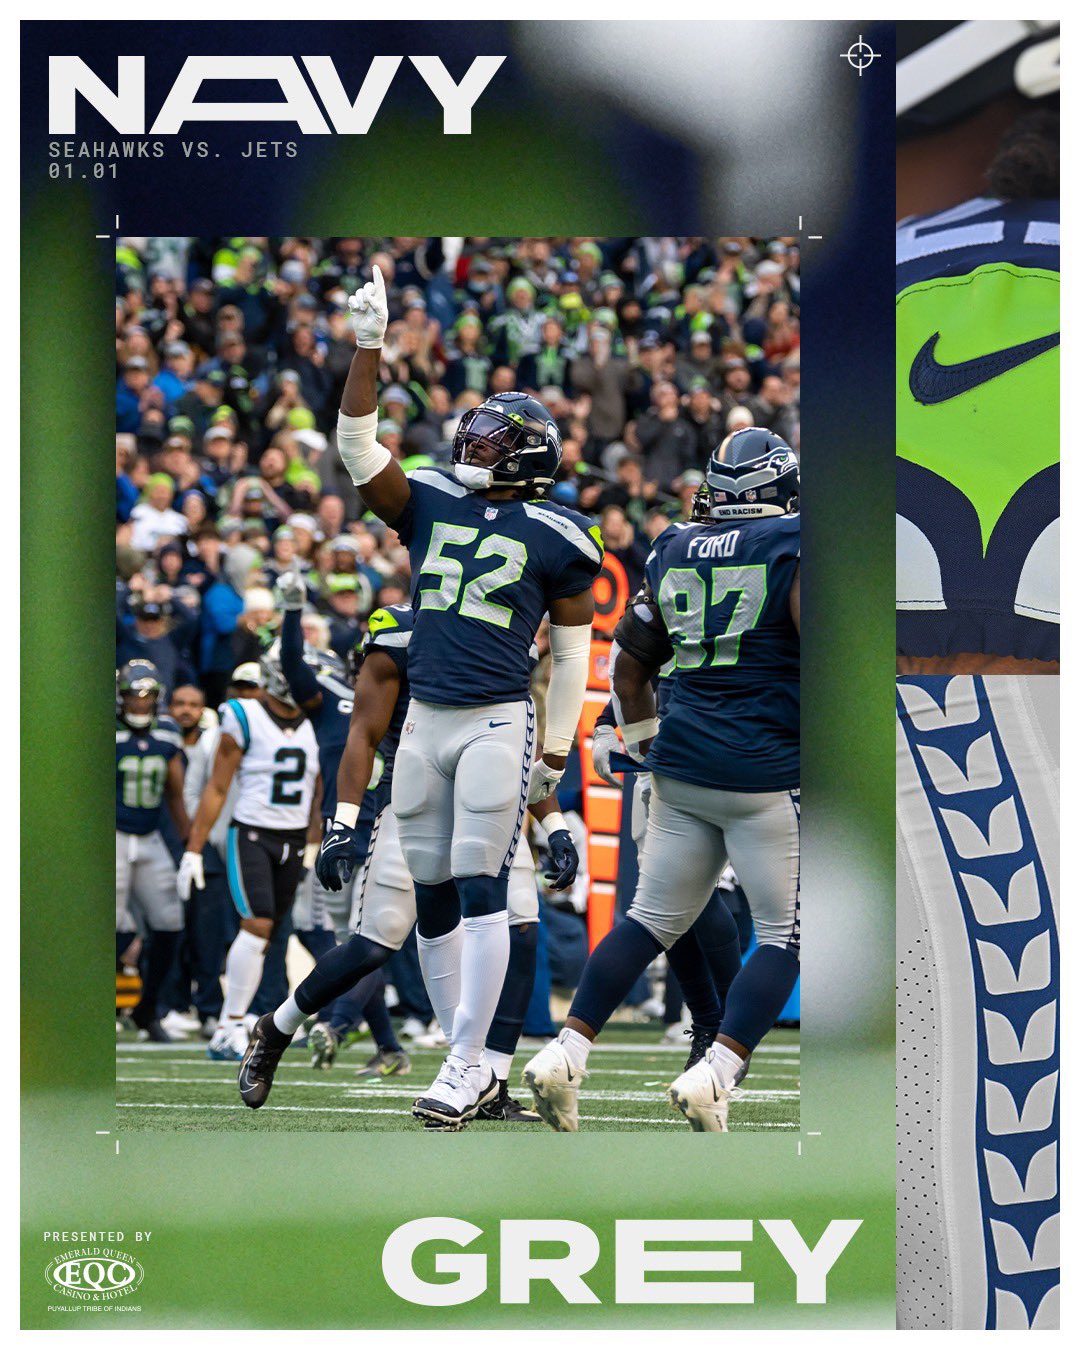 Seattle Seahawks on X: 'Starting out the year with navy/grey